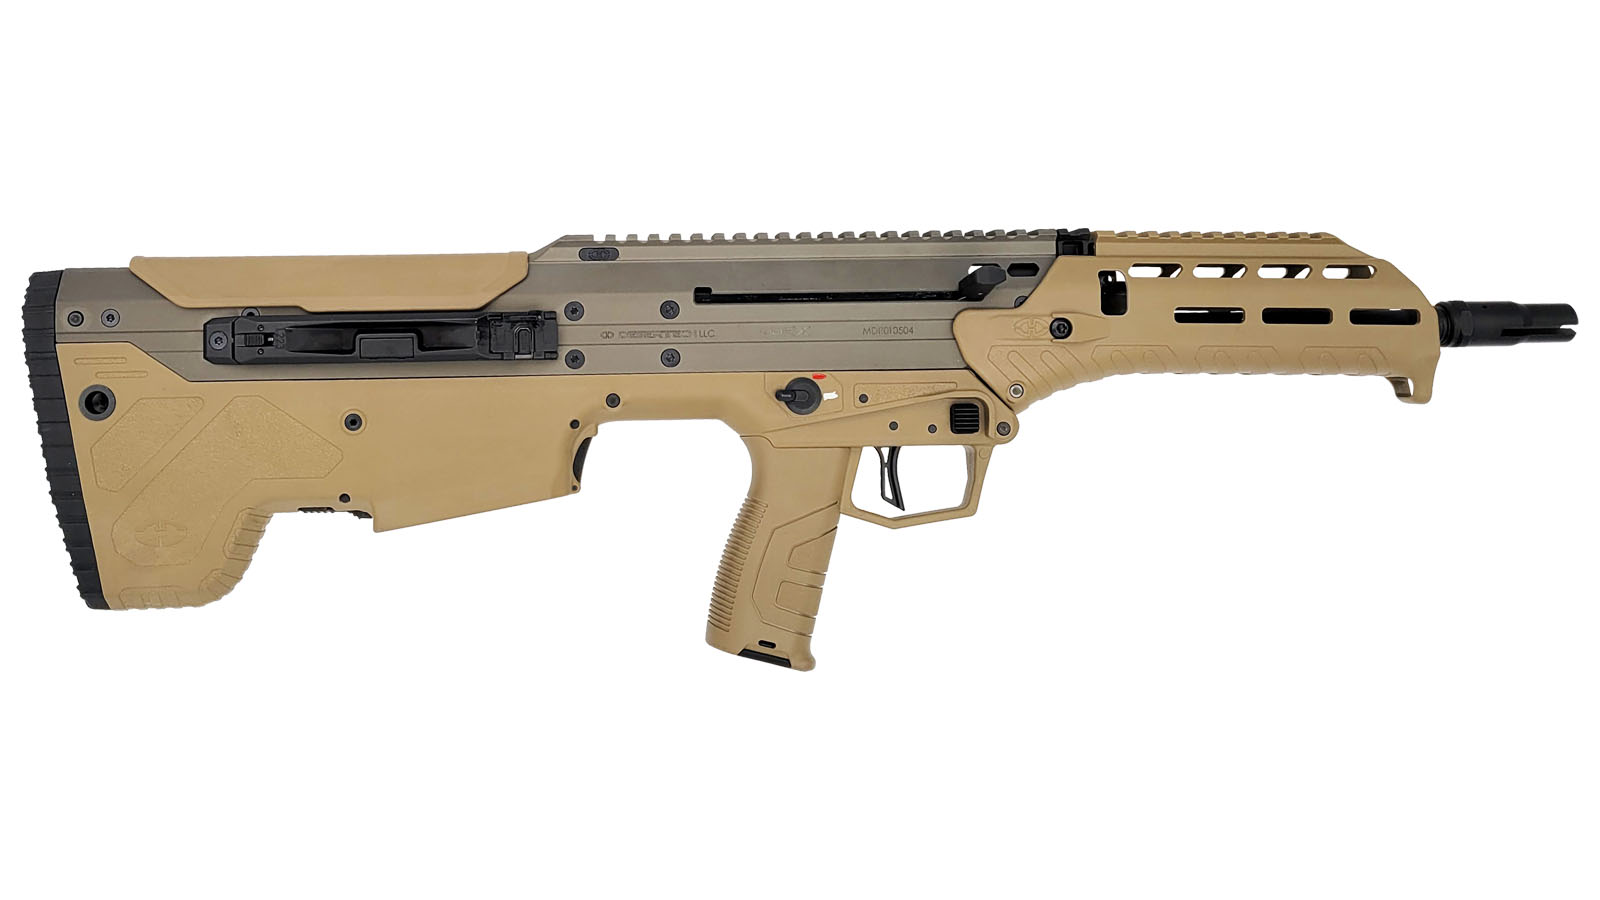 MDRx Rifle, 556NATO 223Rem 16" 30rd Forward-Ejection FDE